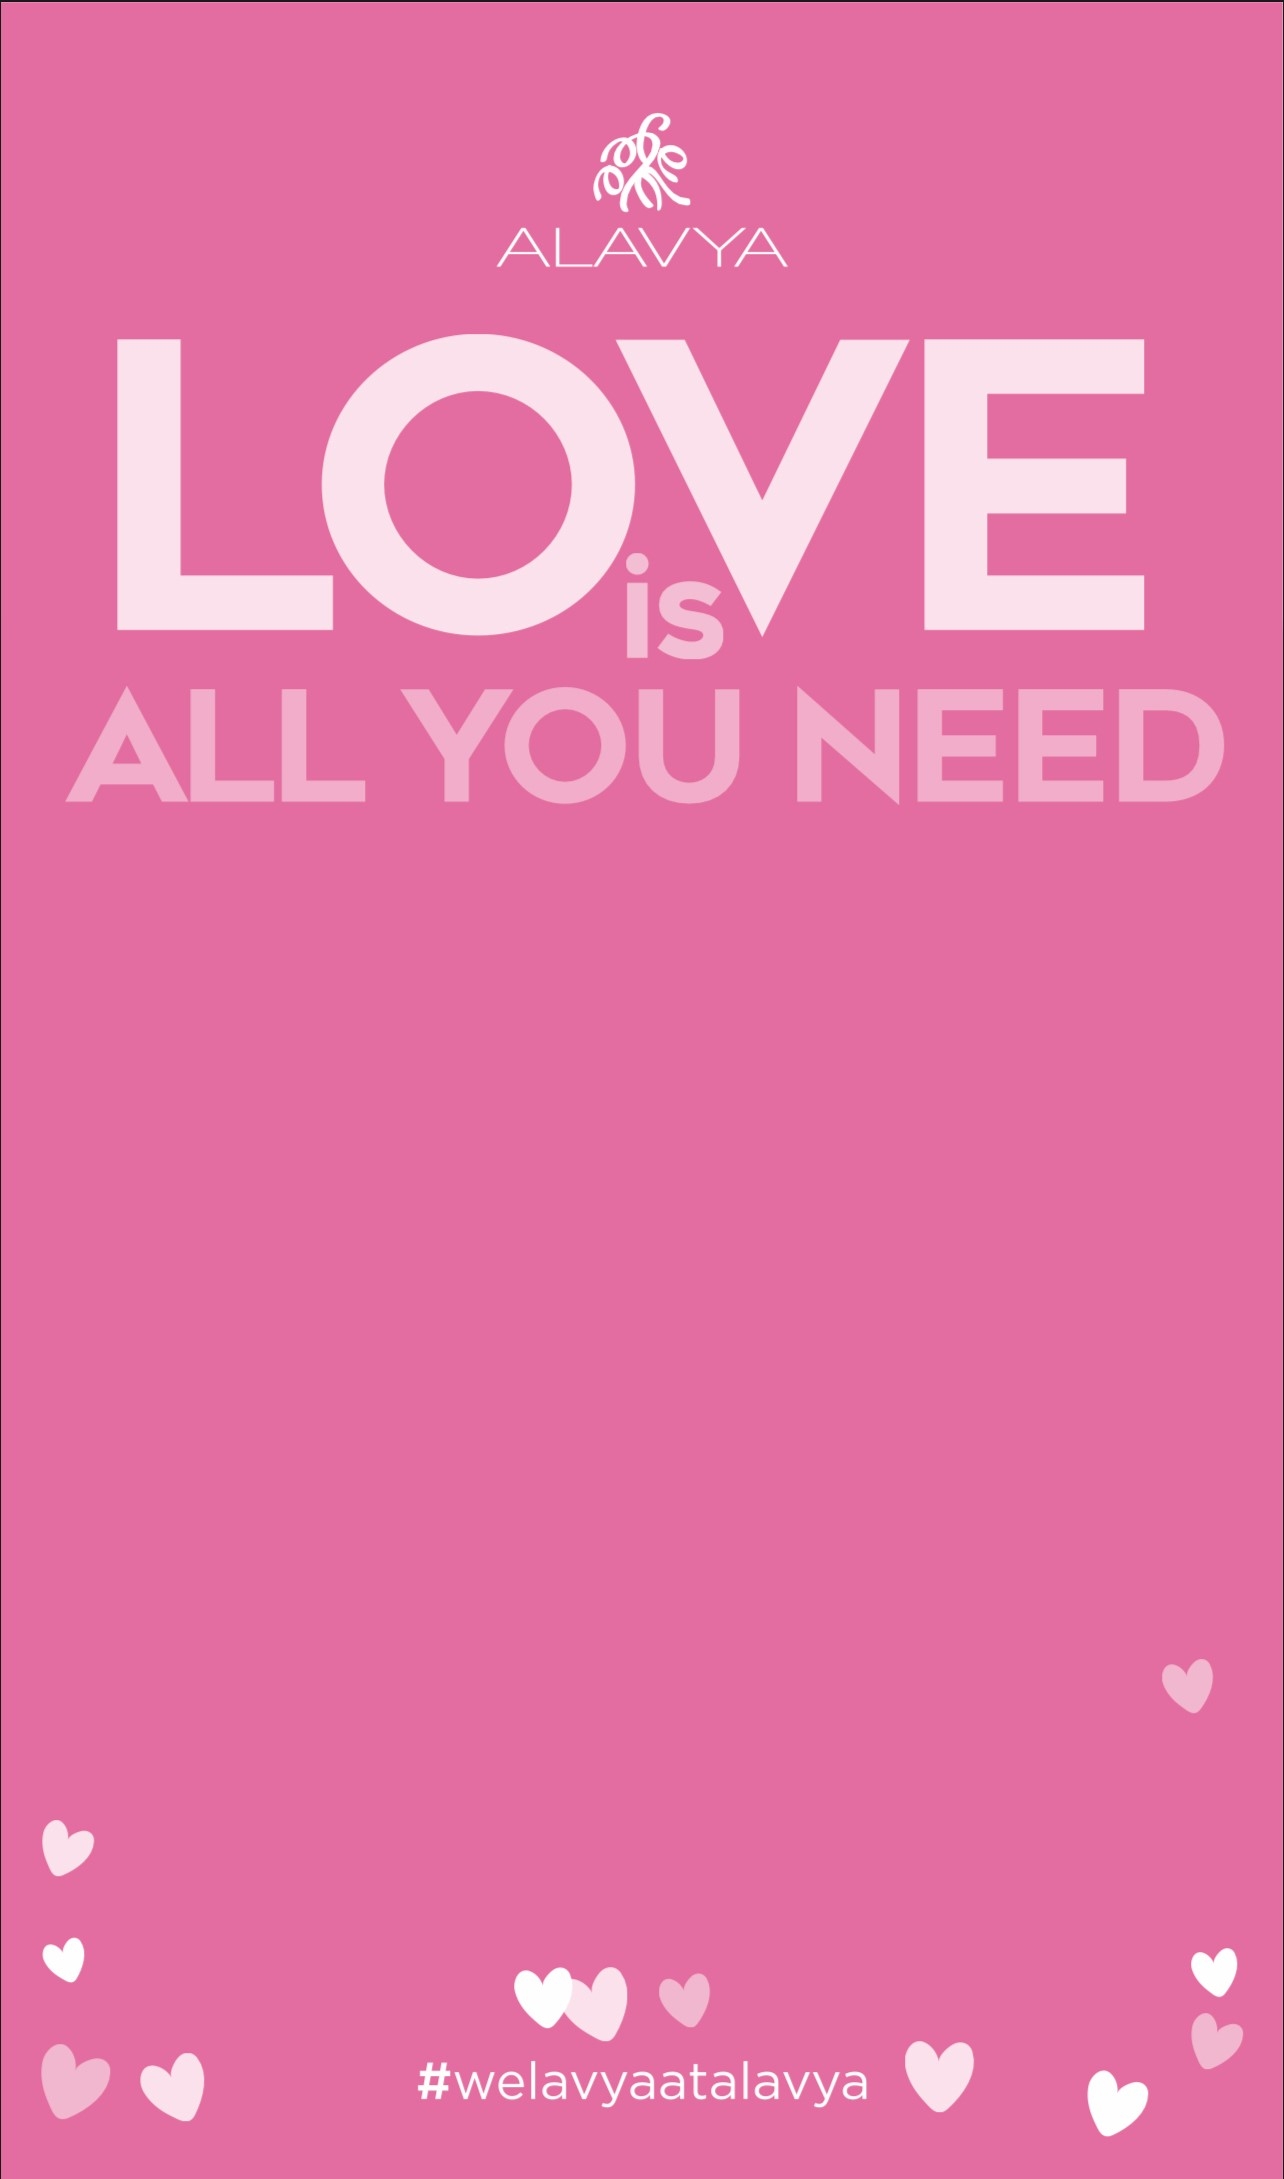 All You Need is LOVE